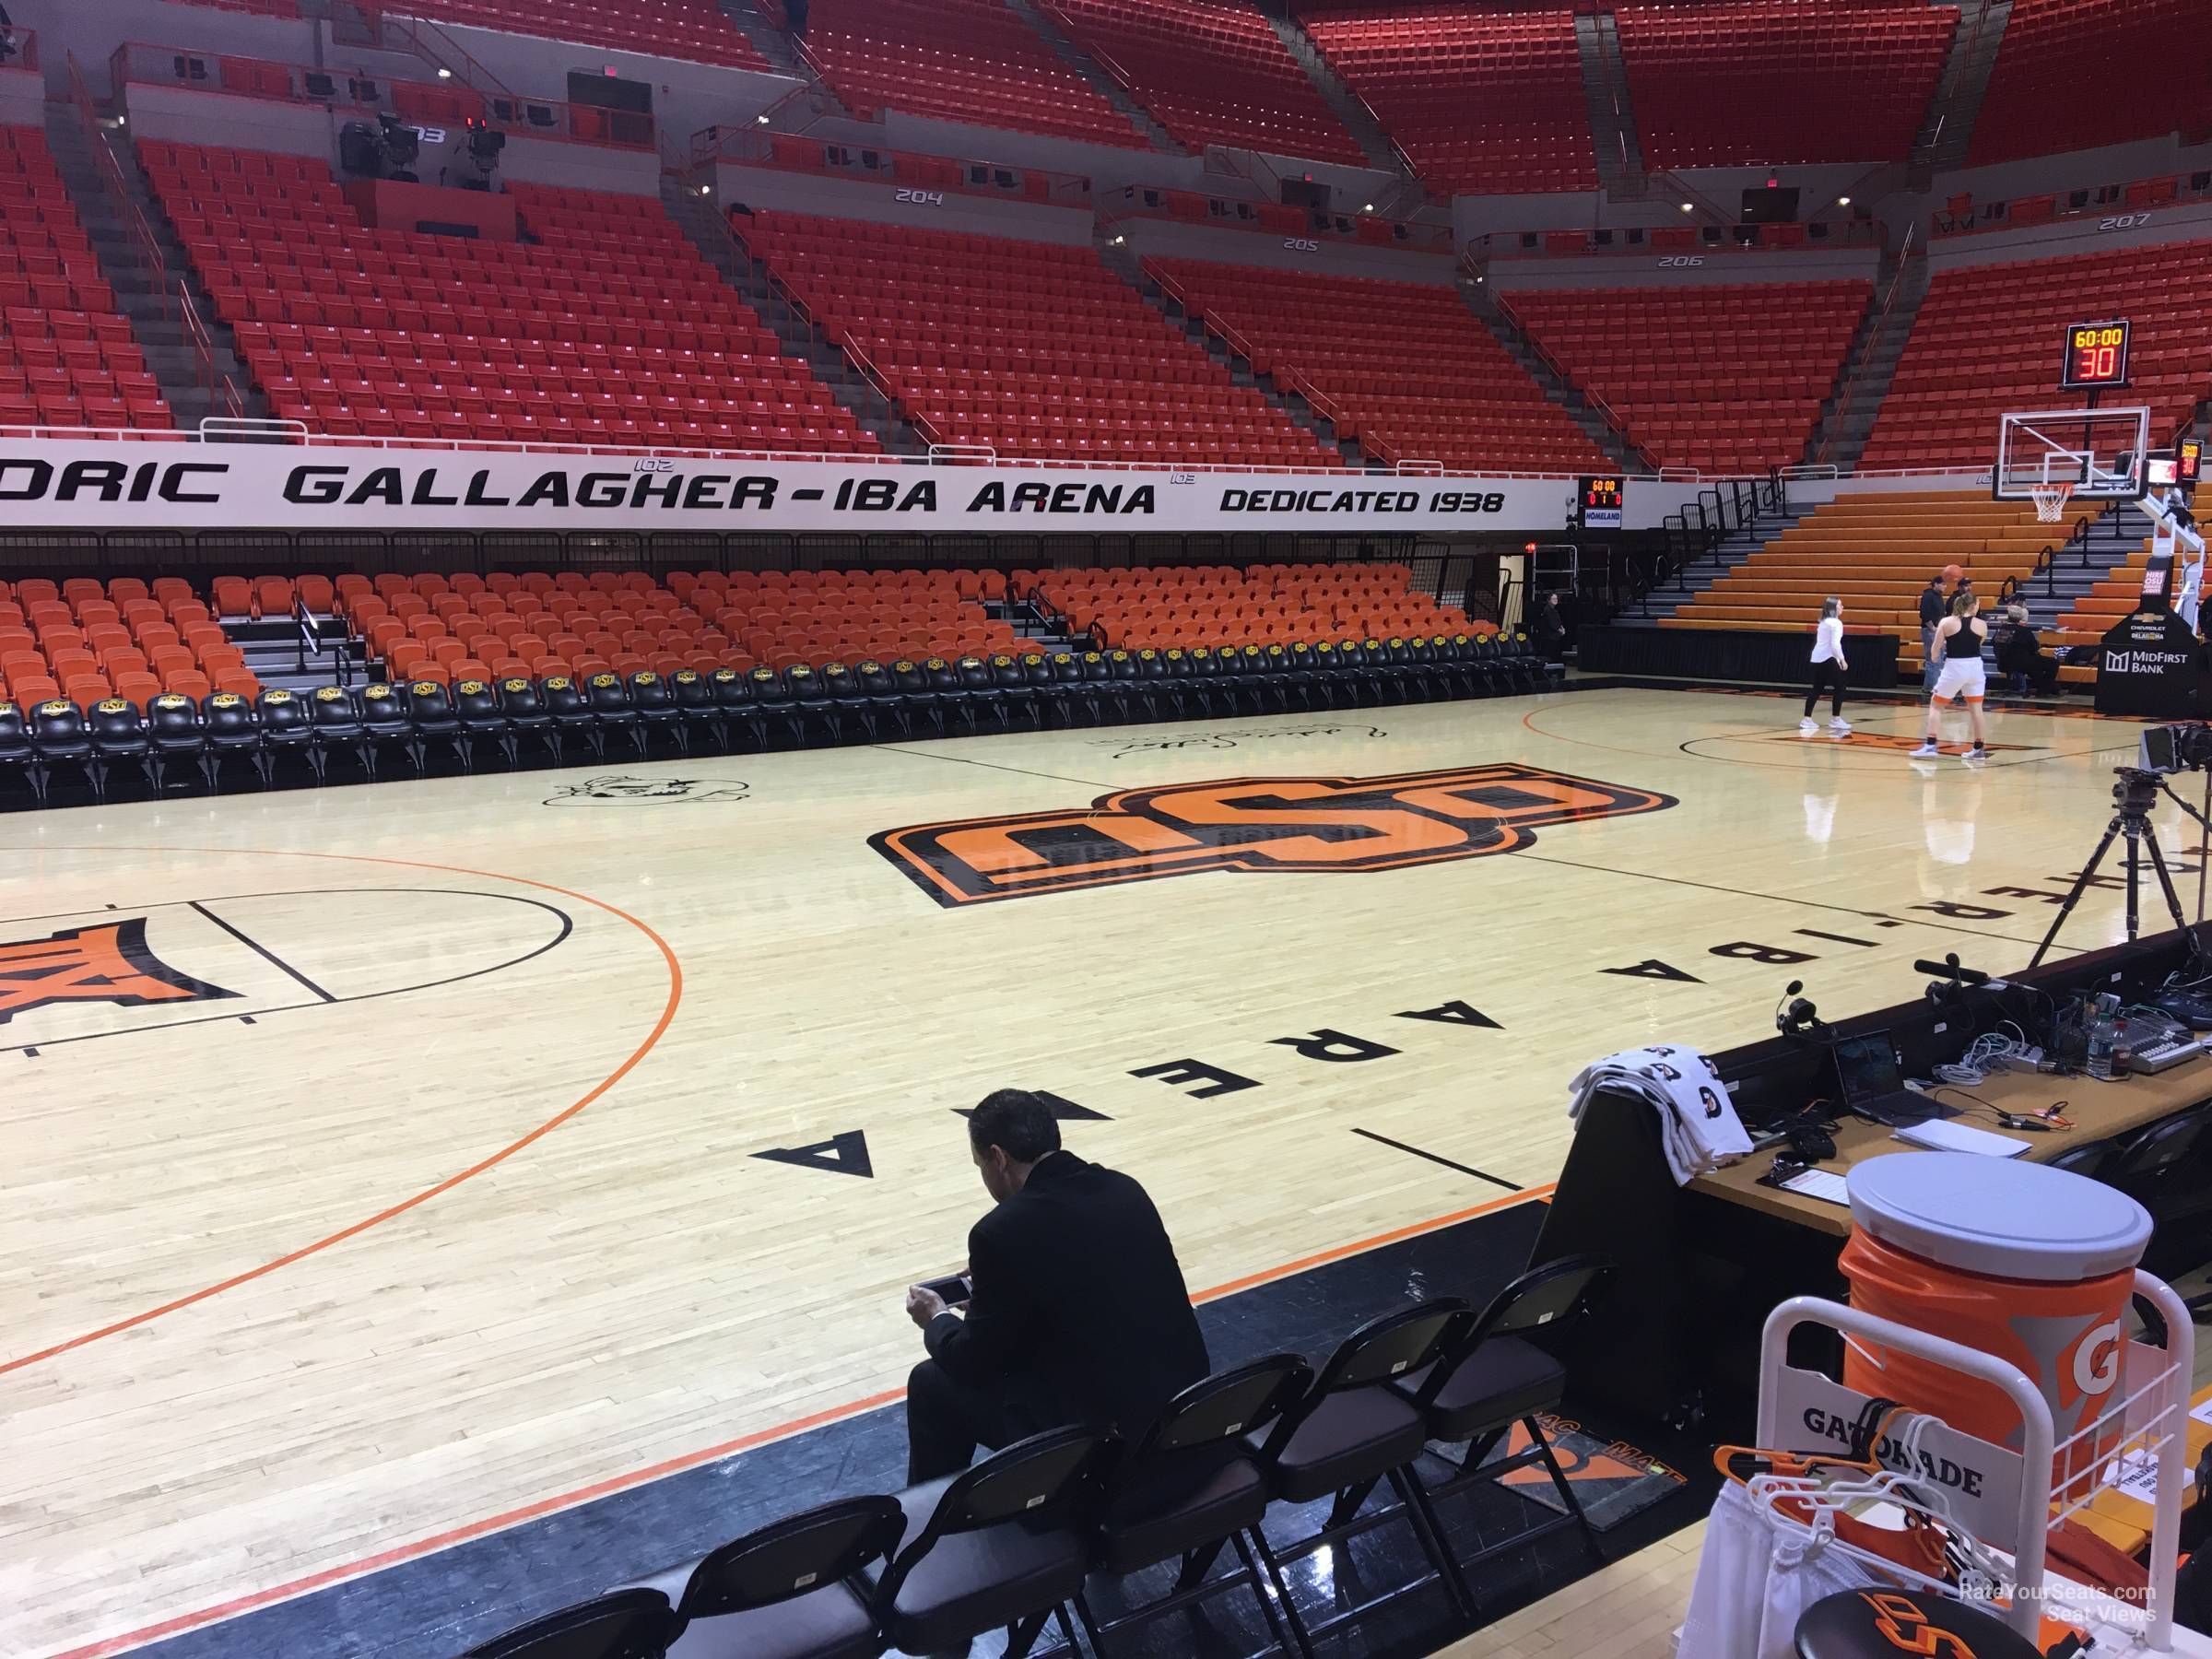 section 109, row 3 seat view  - gallagher-iba arena